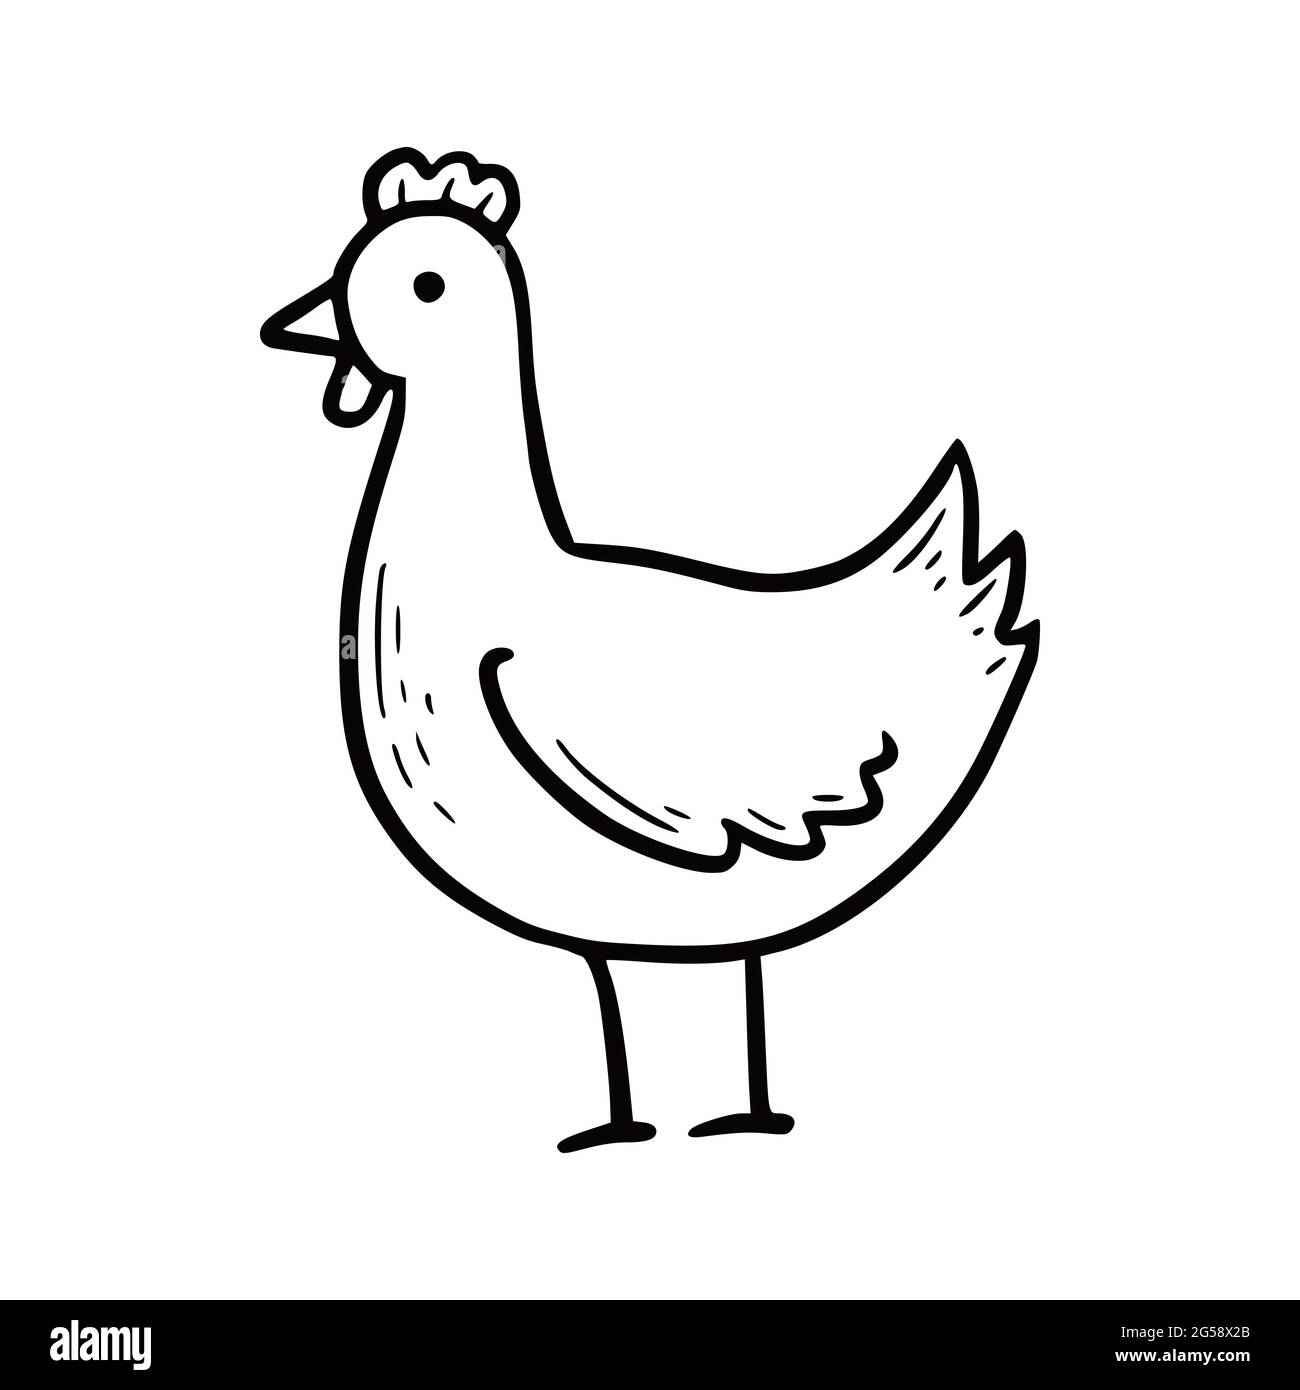 Discover 207+ chicken sketch vector latest